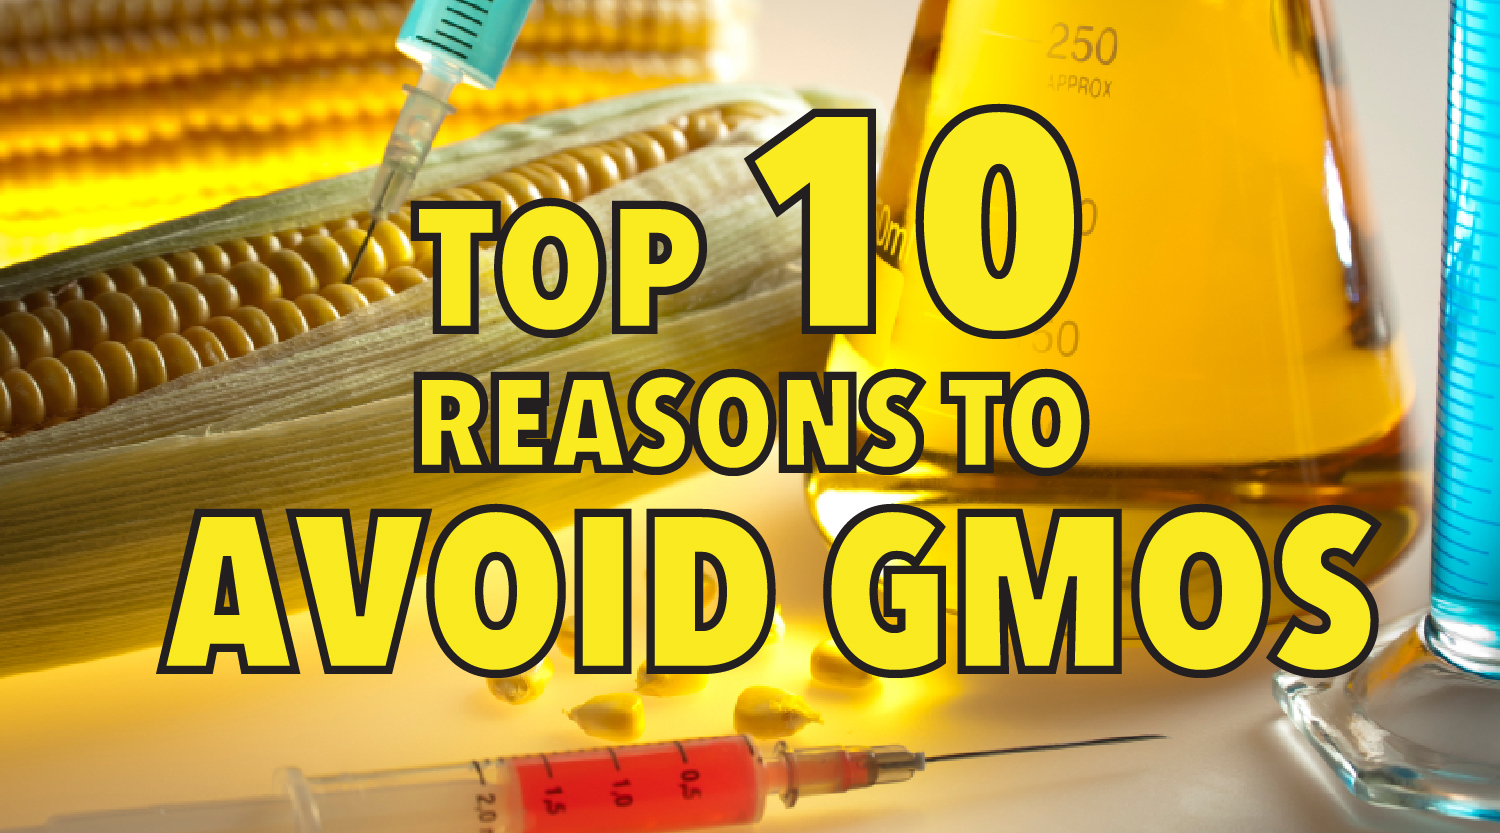 Top 10 reasons to avoid GMOs